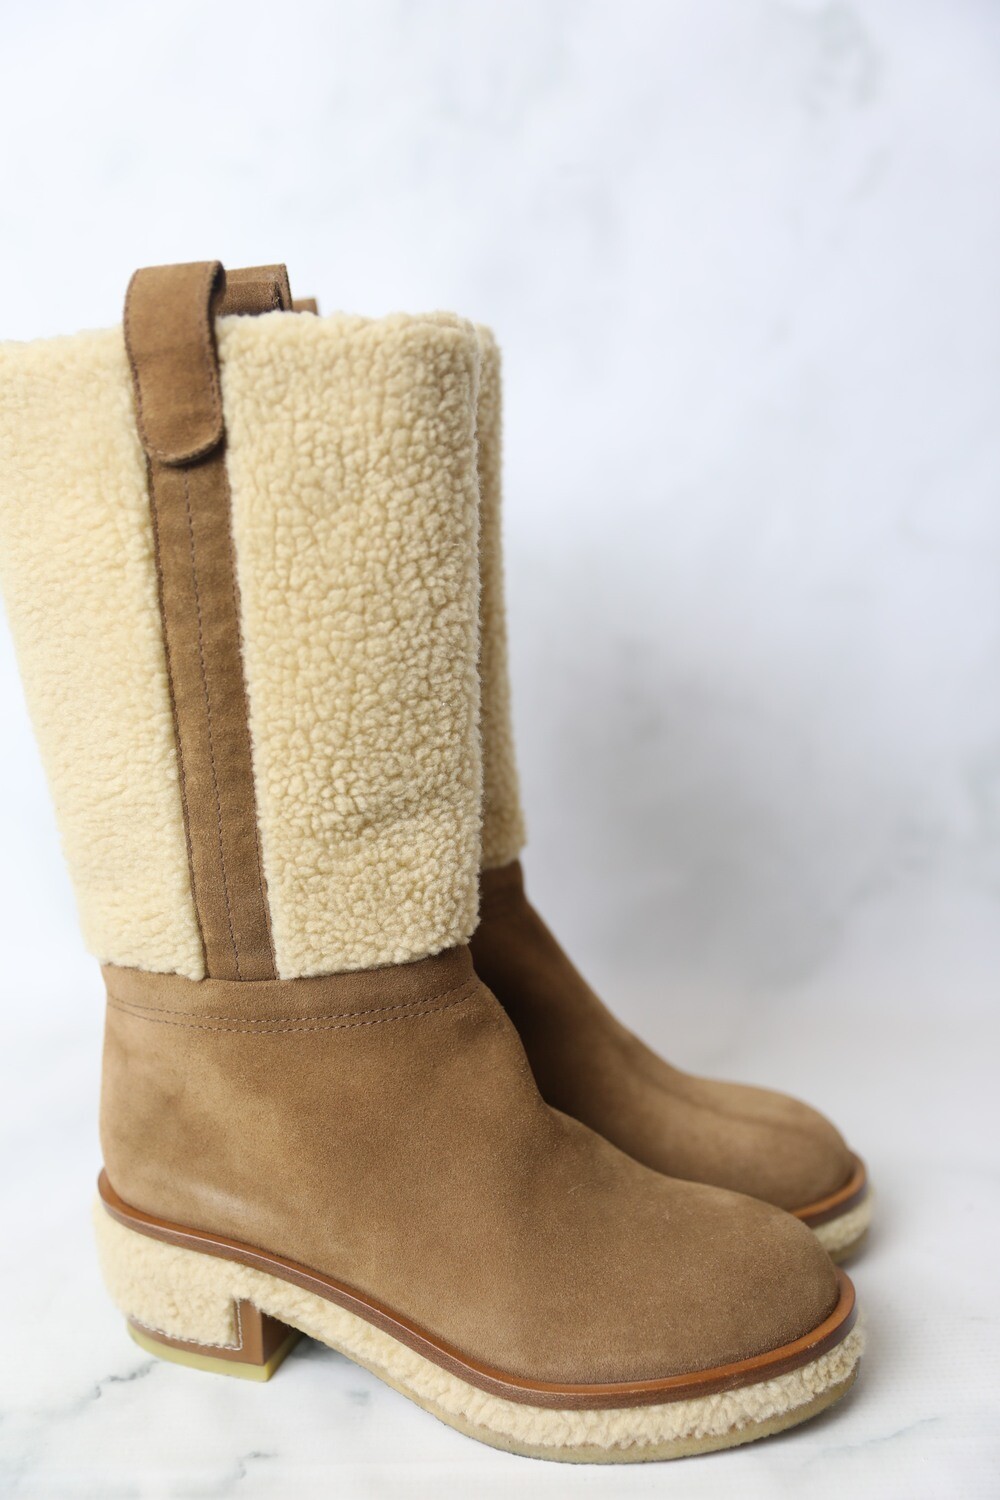 Chanel Tan Suede Shearling Boots, New in Box WA001